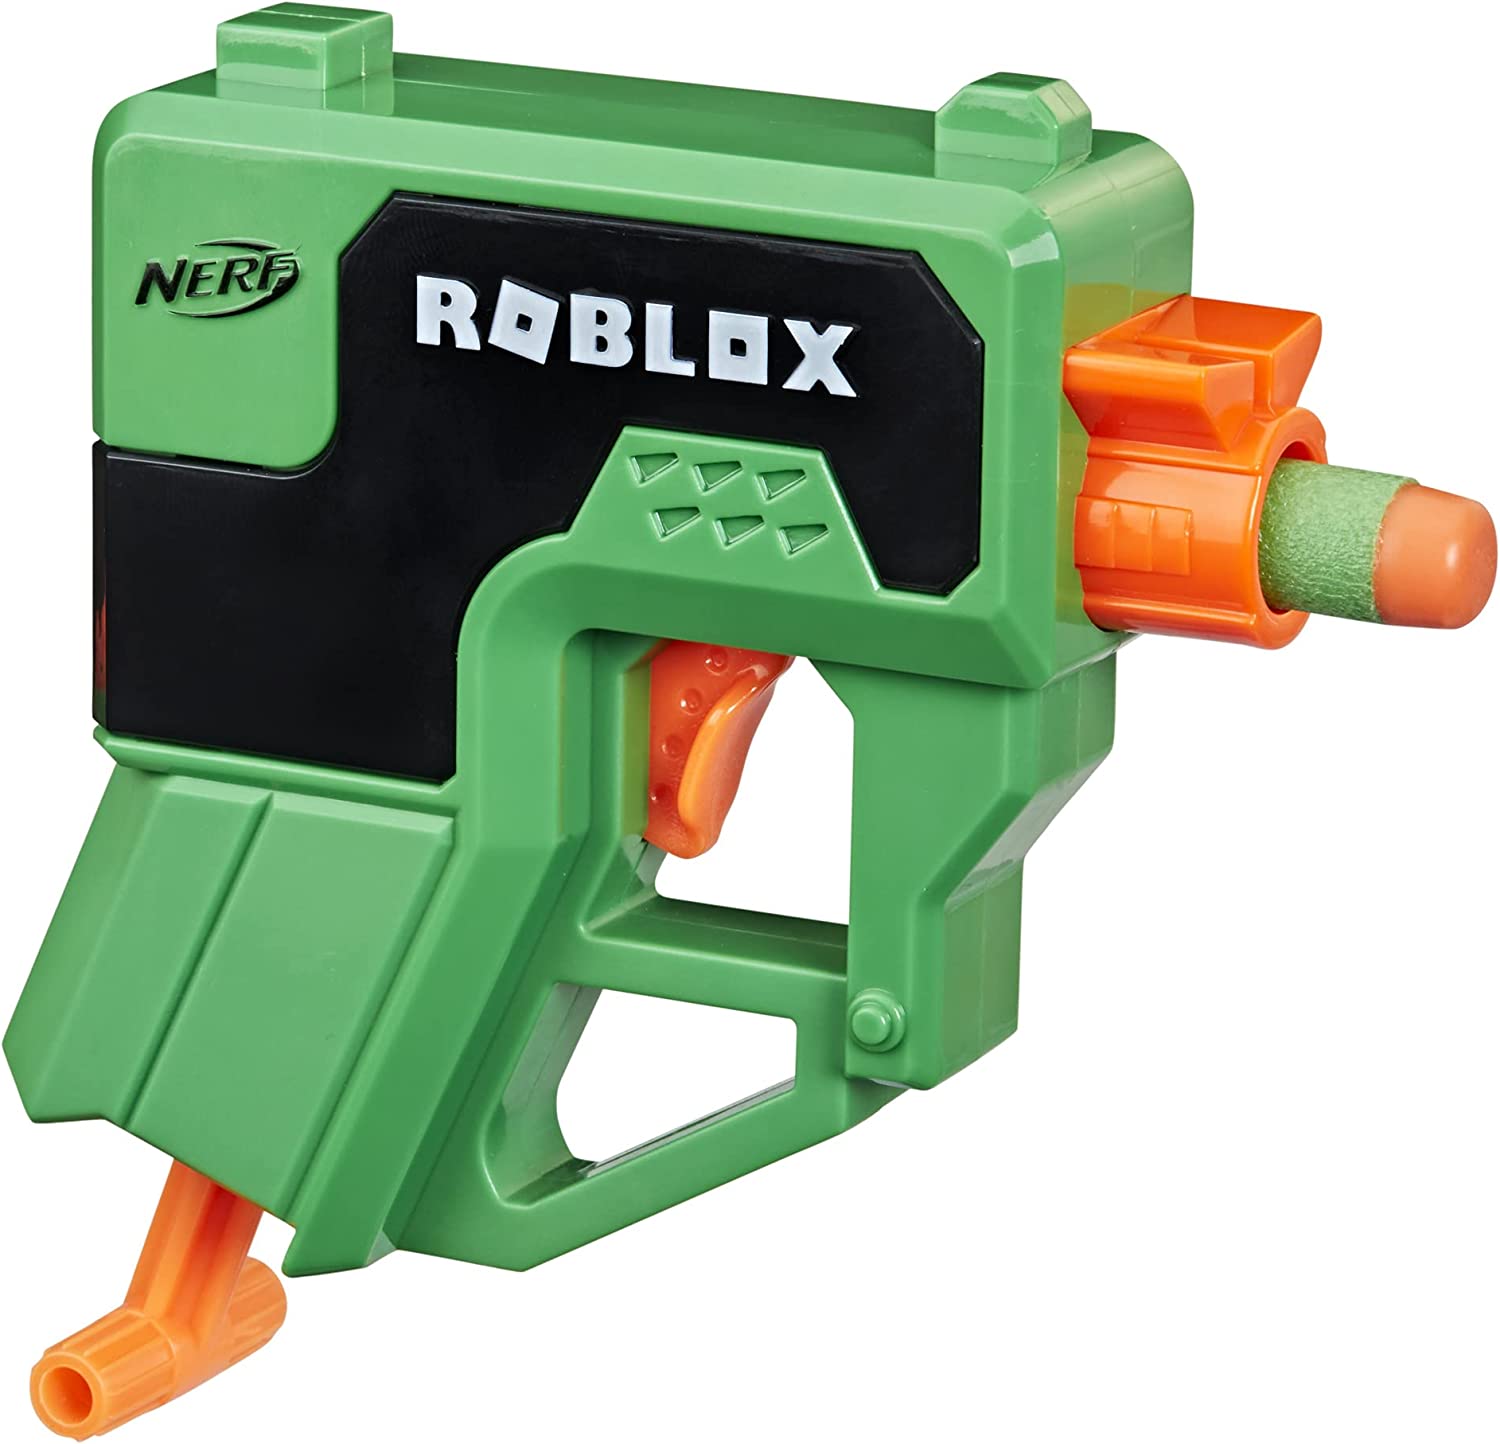 Nerf Roblox Phantom Forces: Boxy Buster